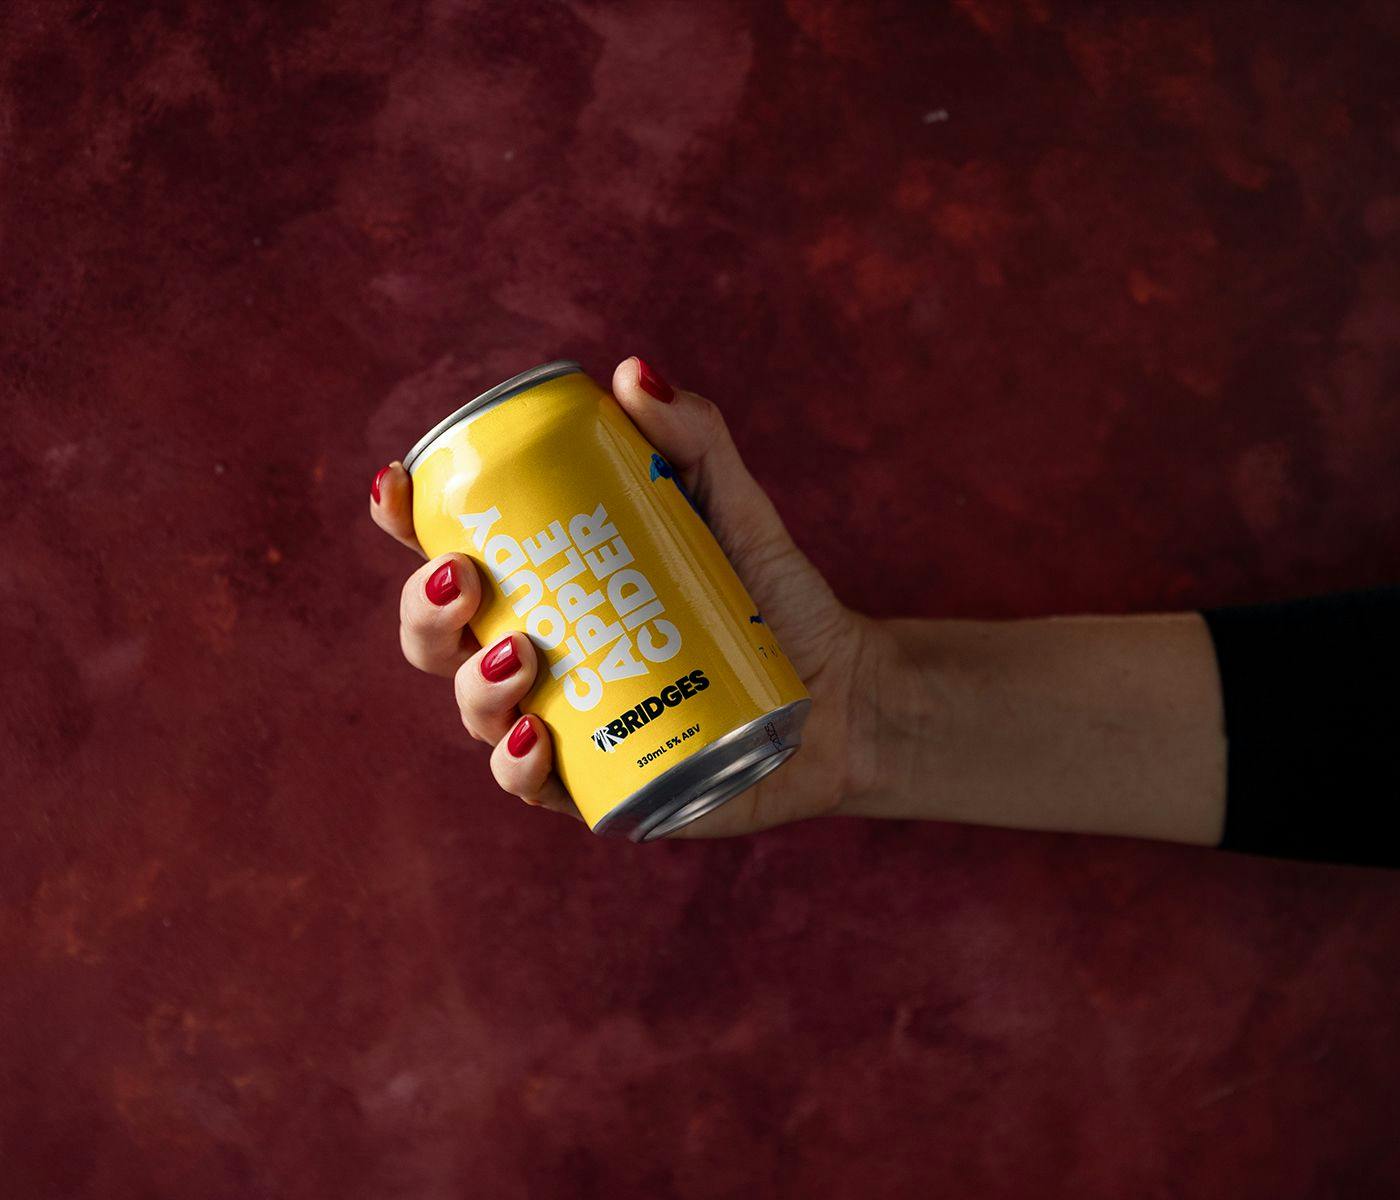 A hand grasps a can of Cloudy Apple Cider.